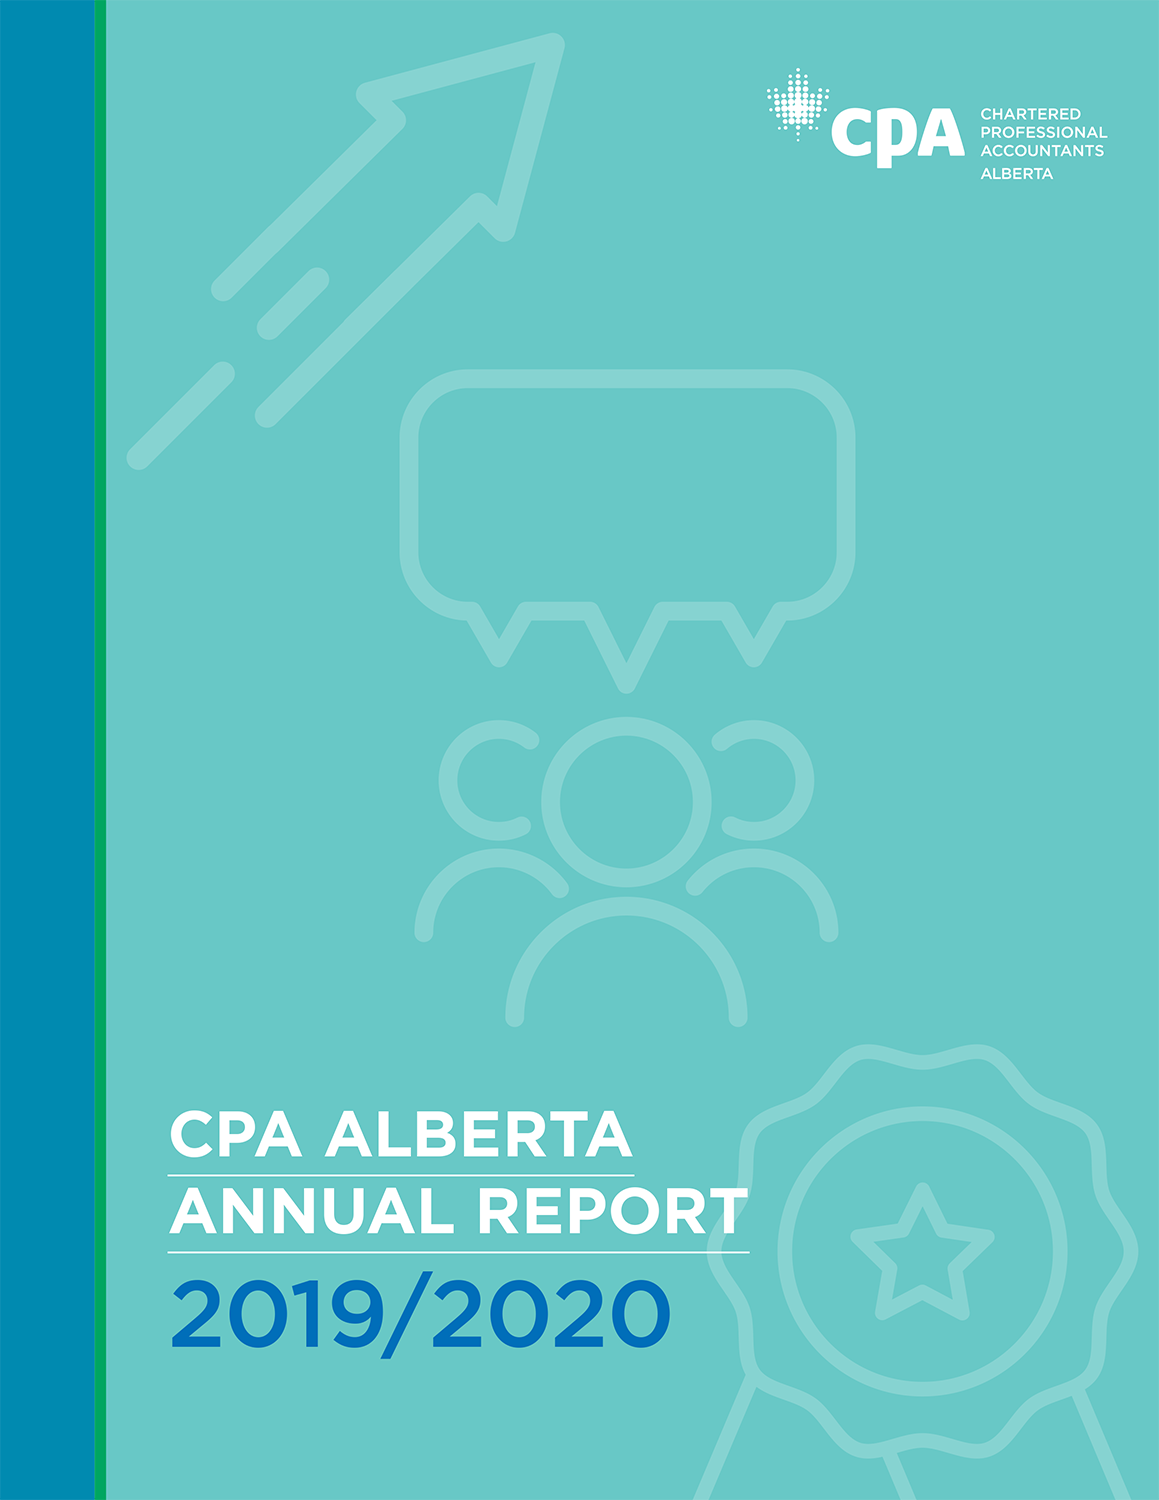 Front cover of the CPA Alberta annual report from 2019-2020